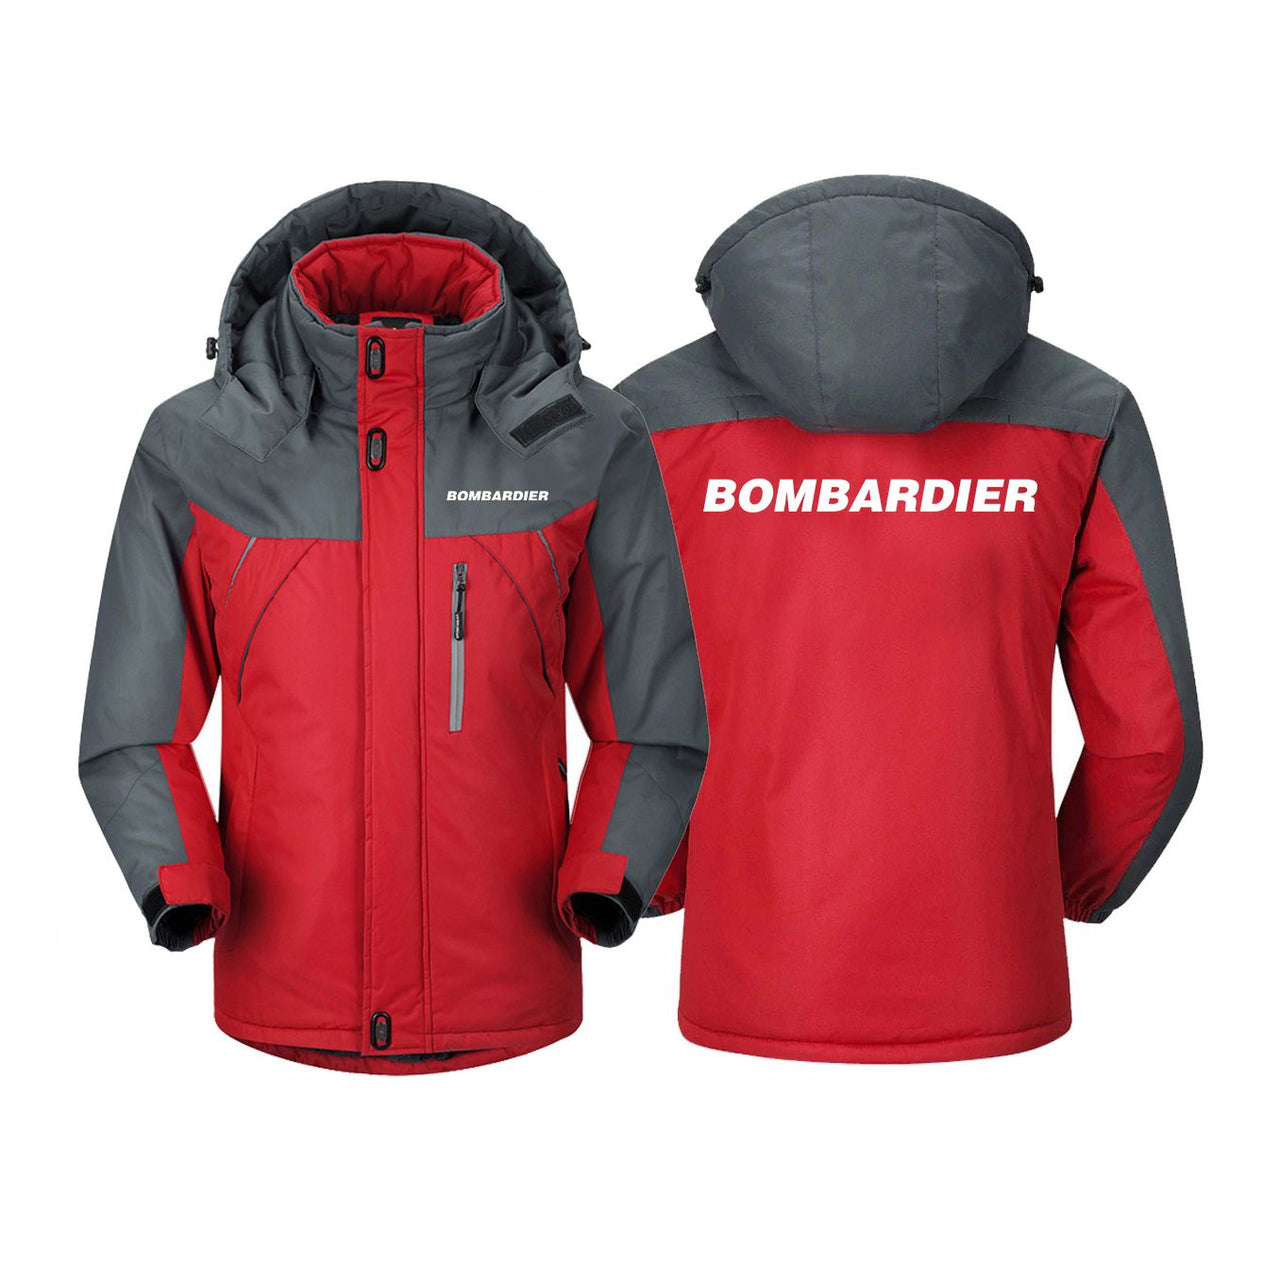 Bombardier & Text Designed Thick Winter Jackets